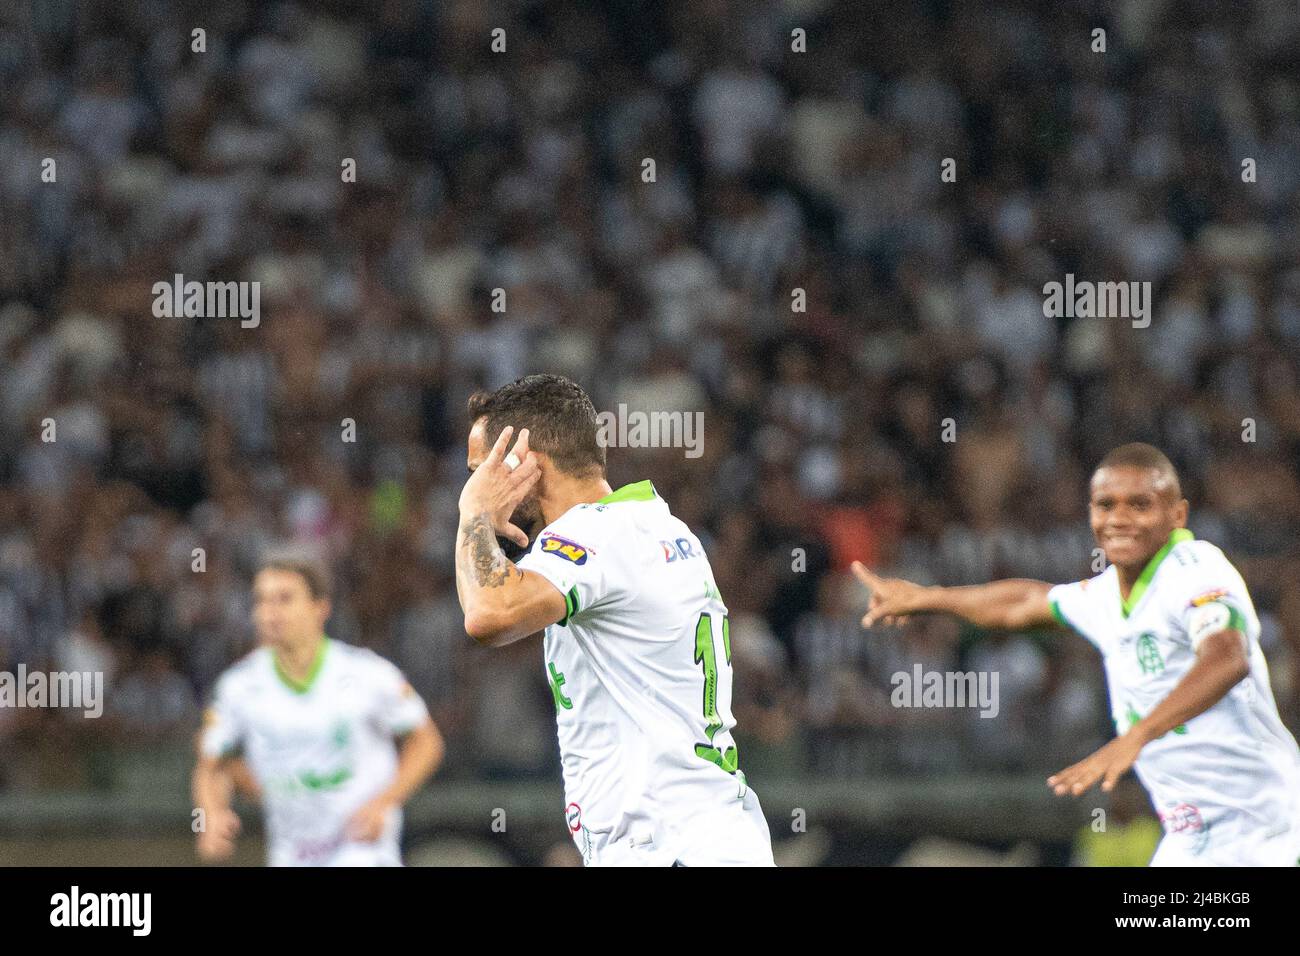 Belo Horizonte, Brazil. 13th Apr, 2022. MG - Belo Horizonte - 04/13/2022 - LIBERTADORES 2022 ATLETICO -MG X AMERICA-MG - Felipe Azevedo player of America-MG celebrates his goal during a match against Atletico-MG at Mineirao stadium for the Copa Libertadores 2022 championship. Photo: Alessandra Towers/AGIF Credit: AGIF/Alamy Live News Stock Photo